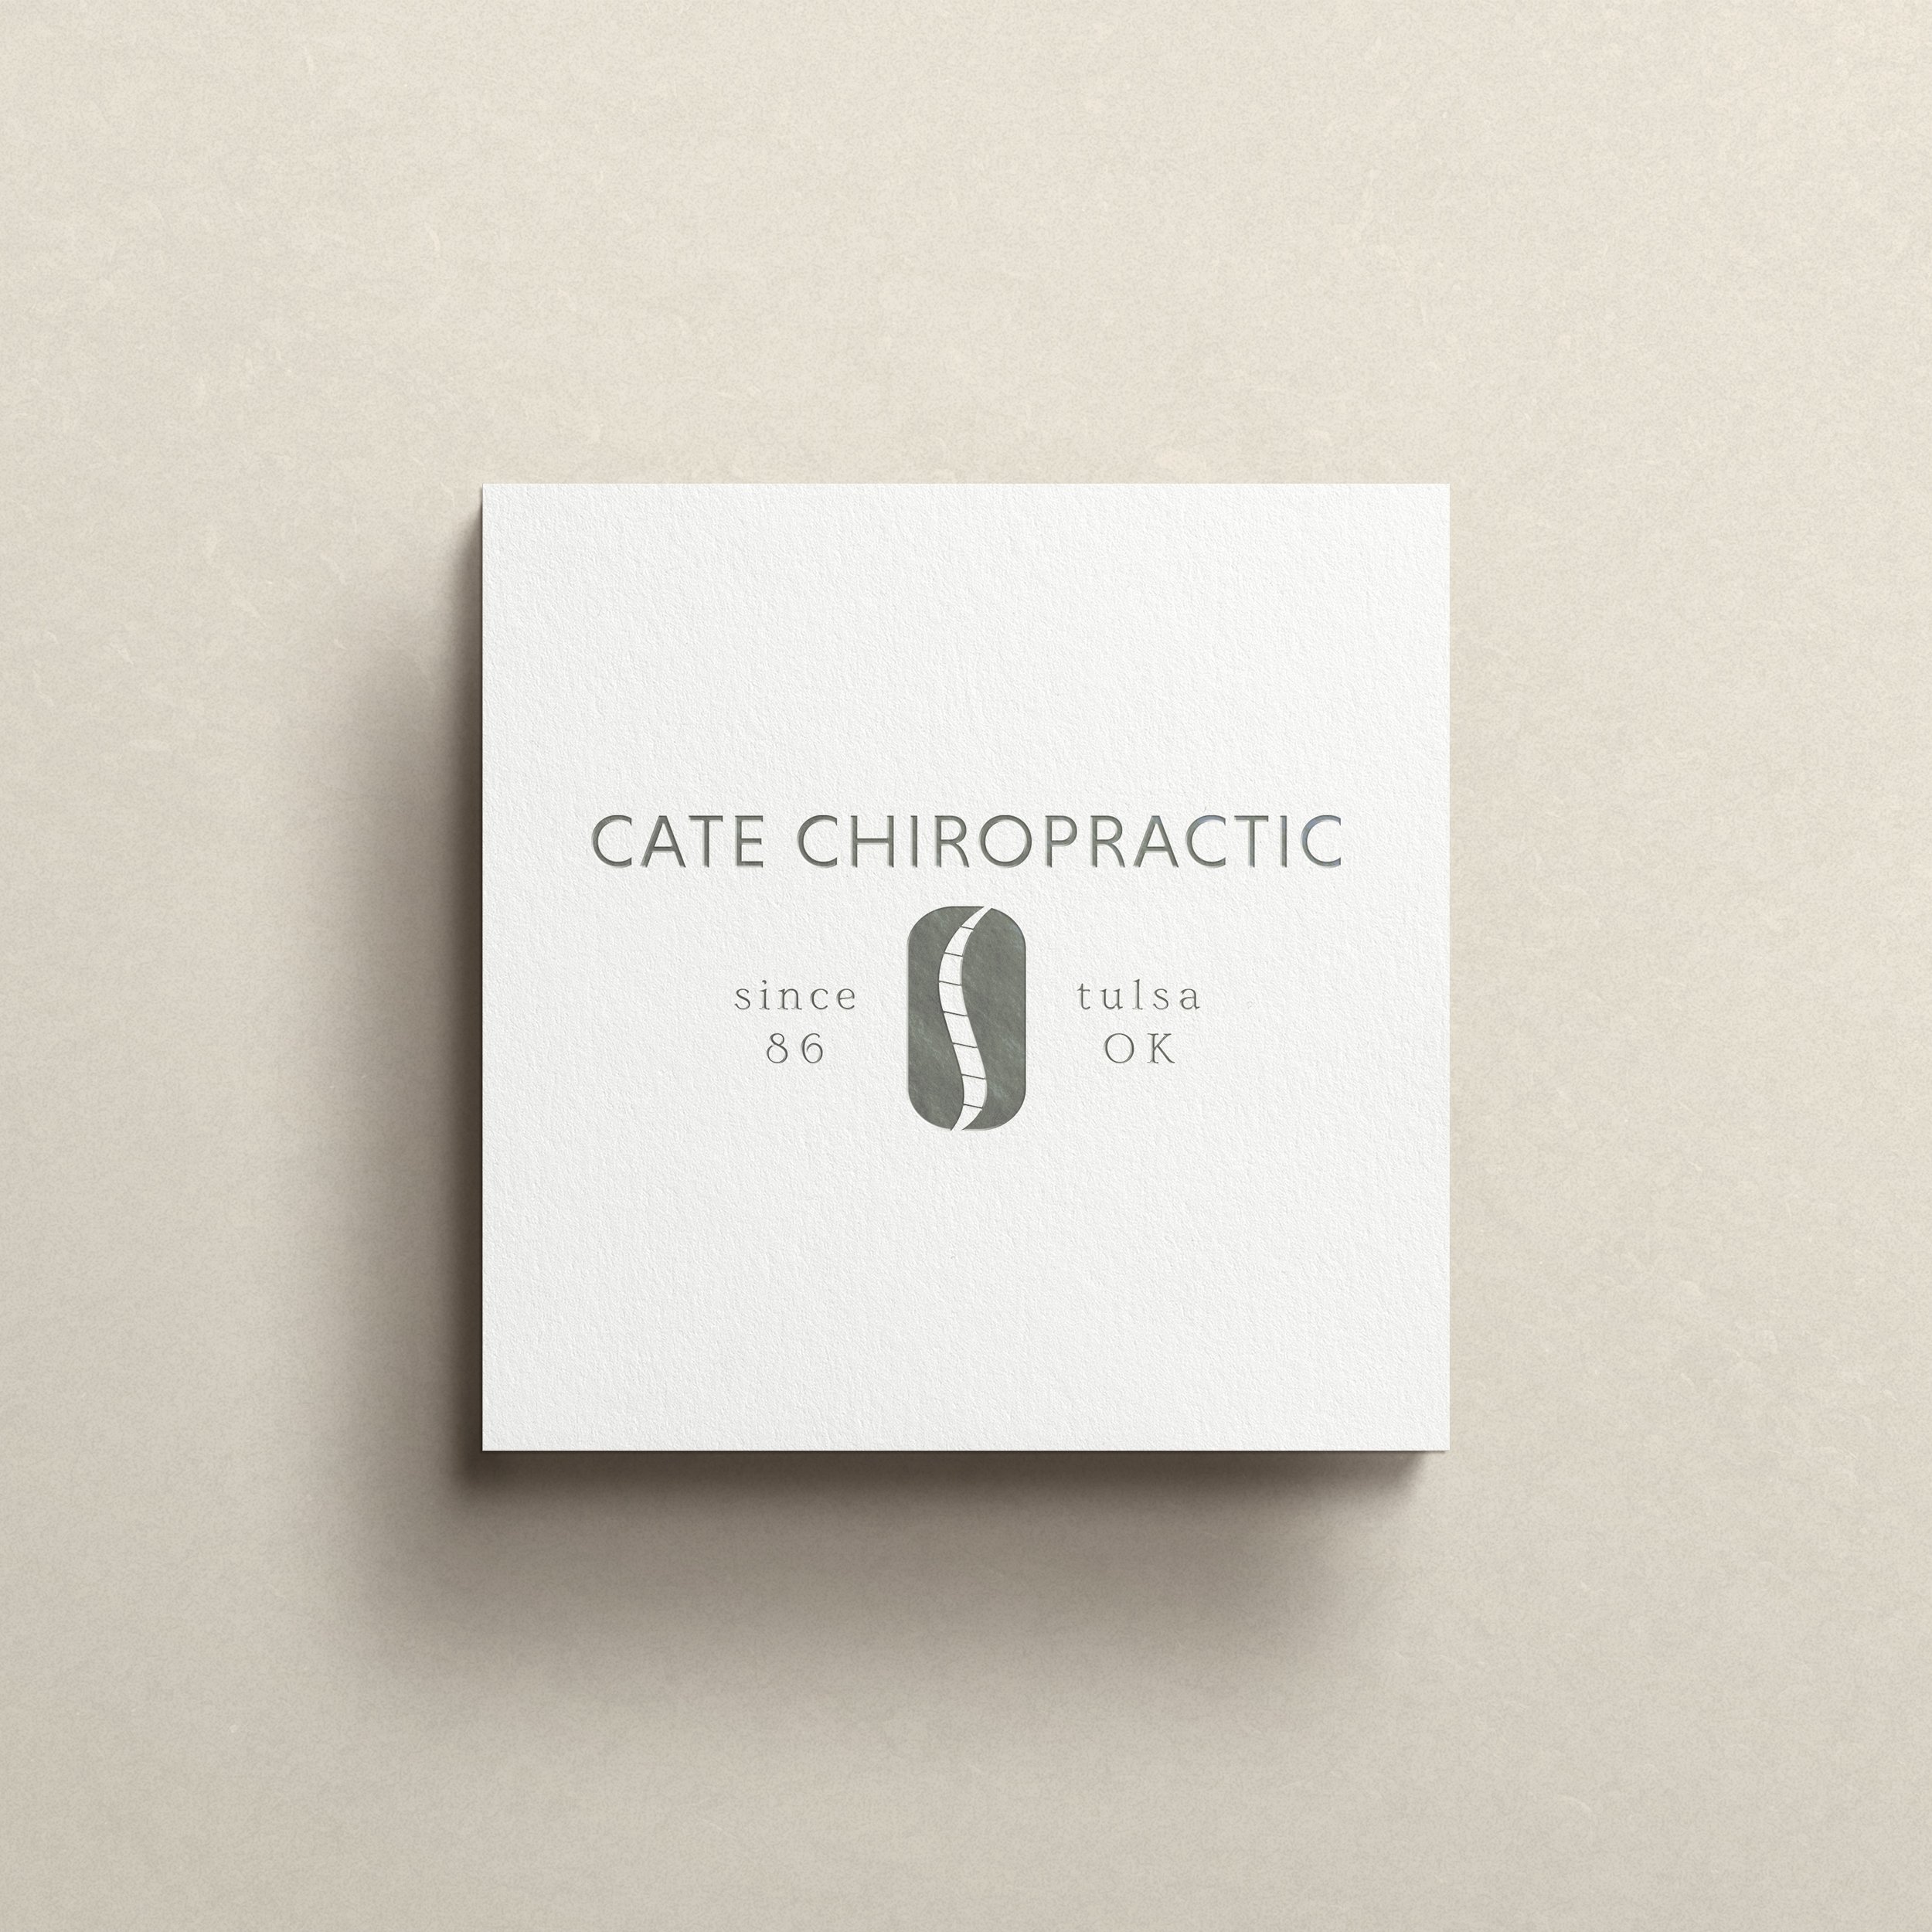 Cate-Chiropractic-Beyond-Design-Co1.jpeg